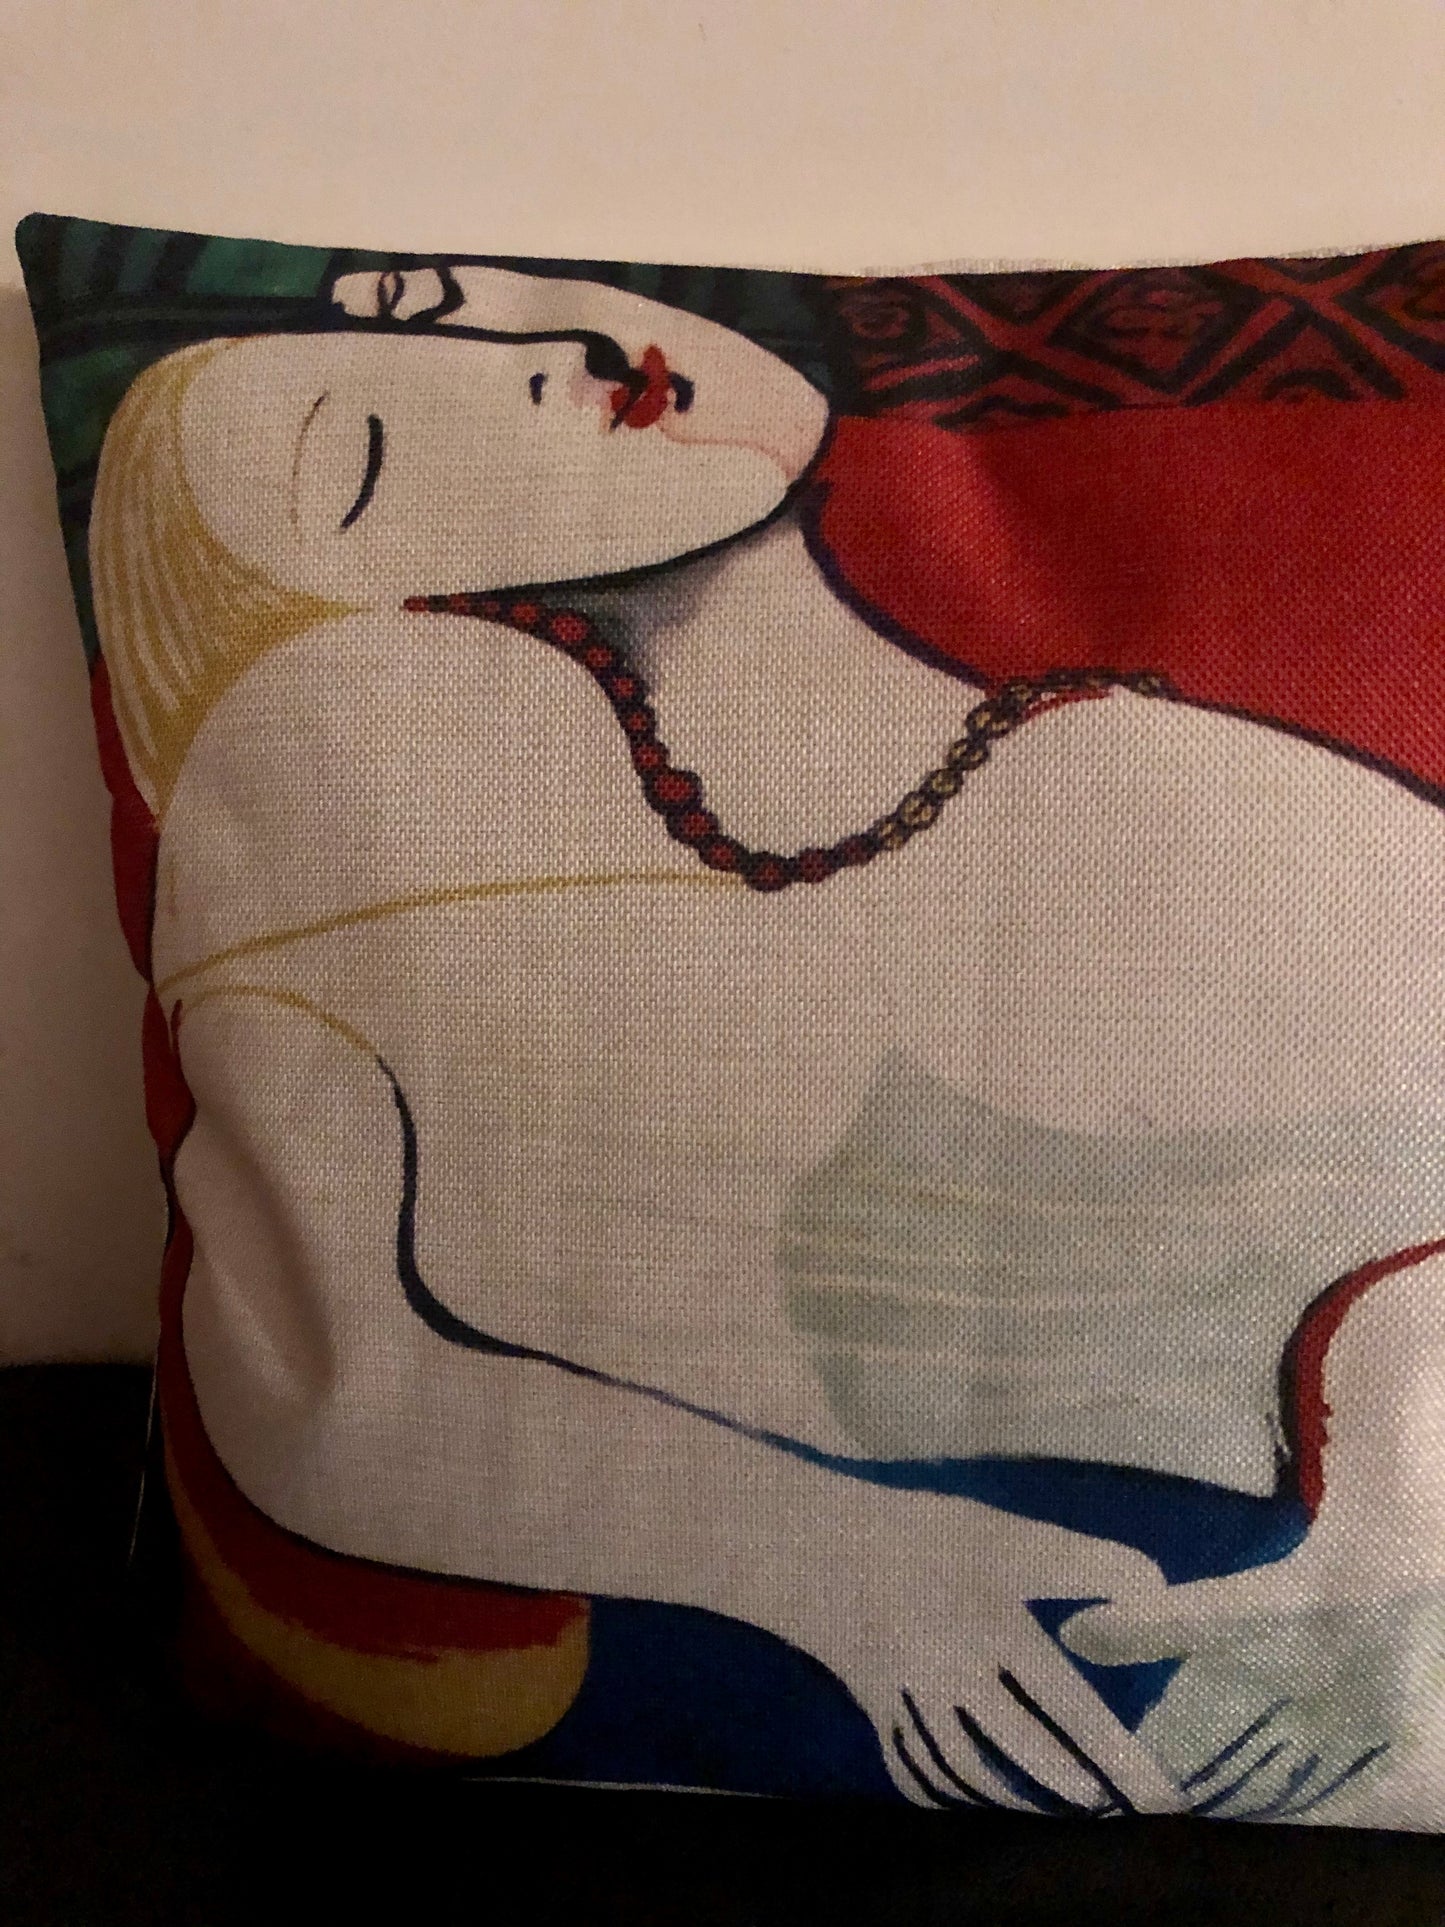 a pillow with a picture of a woman on it